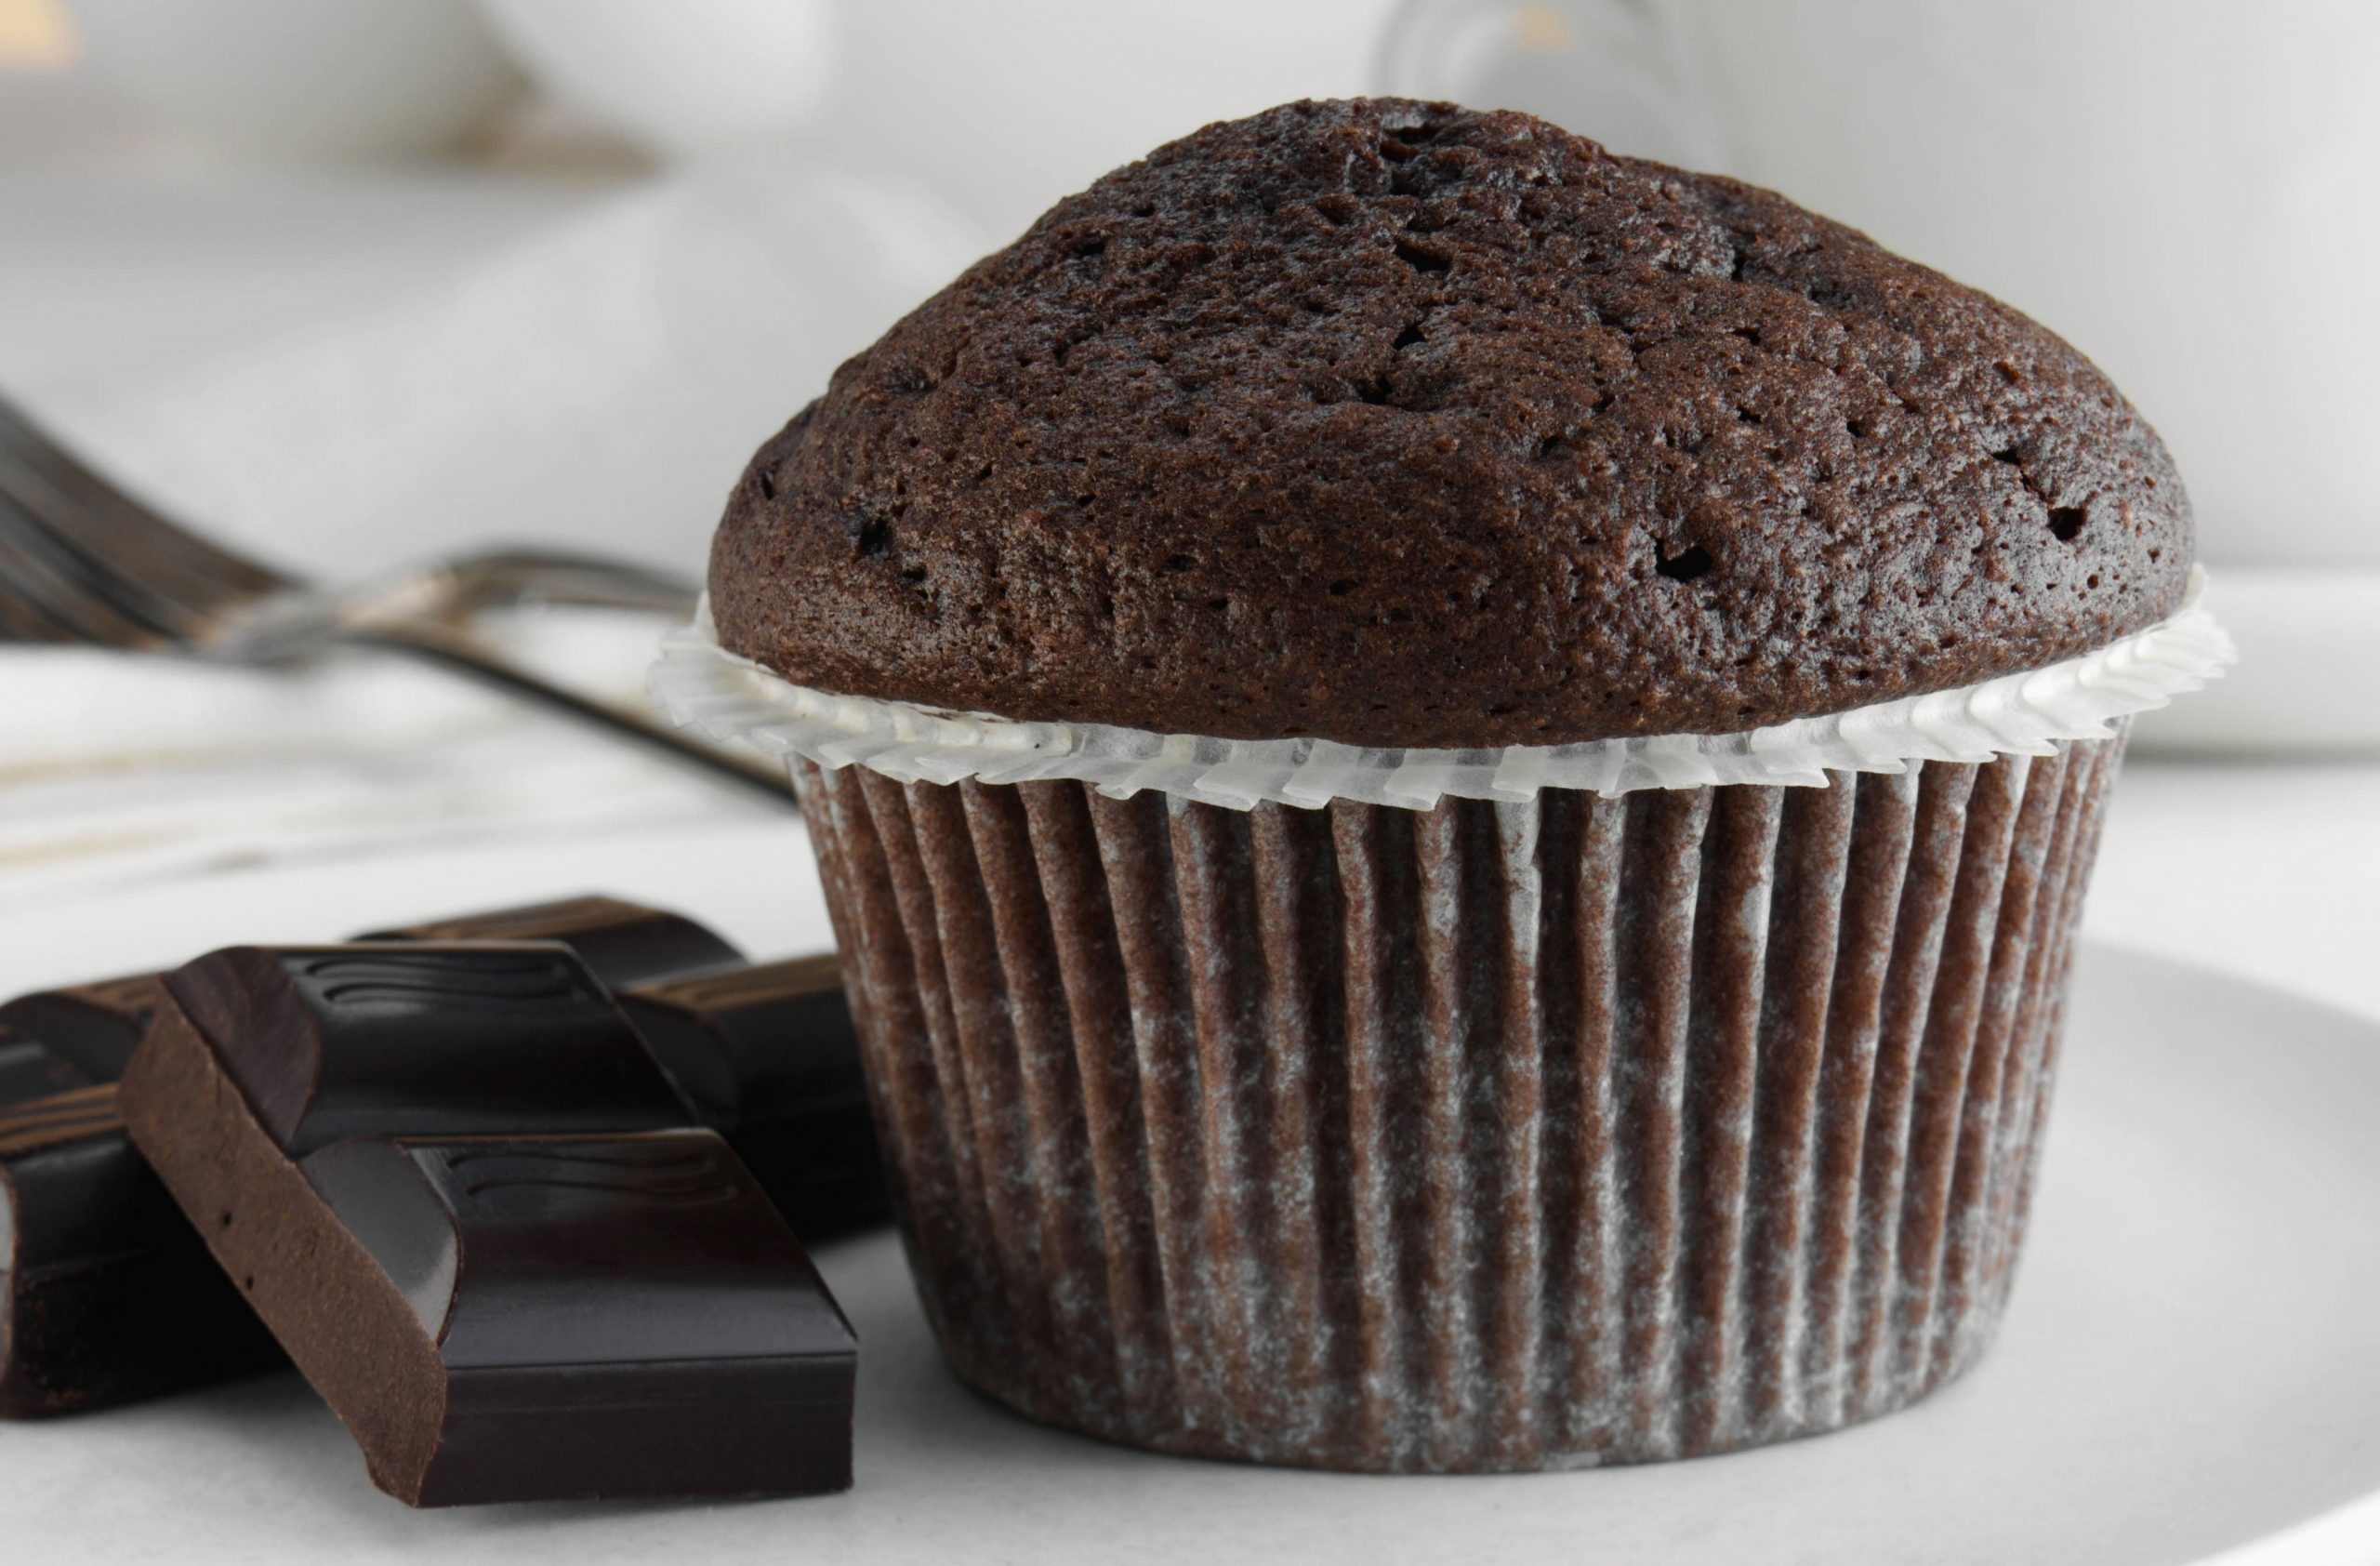 Muffin: Made with a combination of flour, sugar, eggs, butter or oil, and a leavening agent. 2560x1690 HD Background.